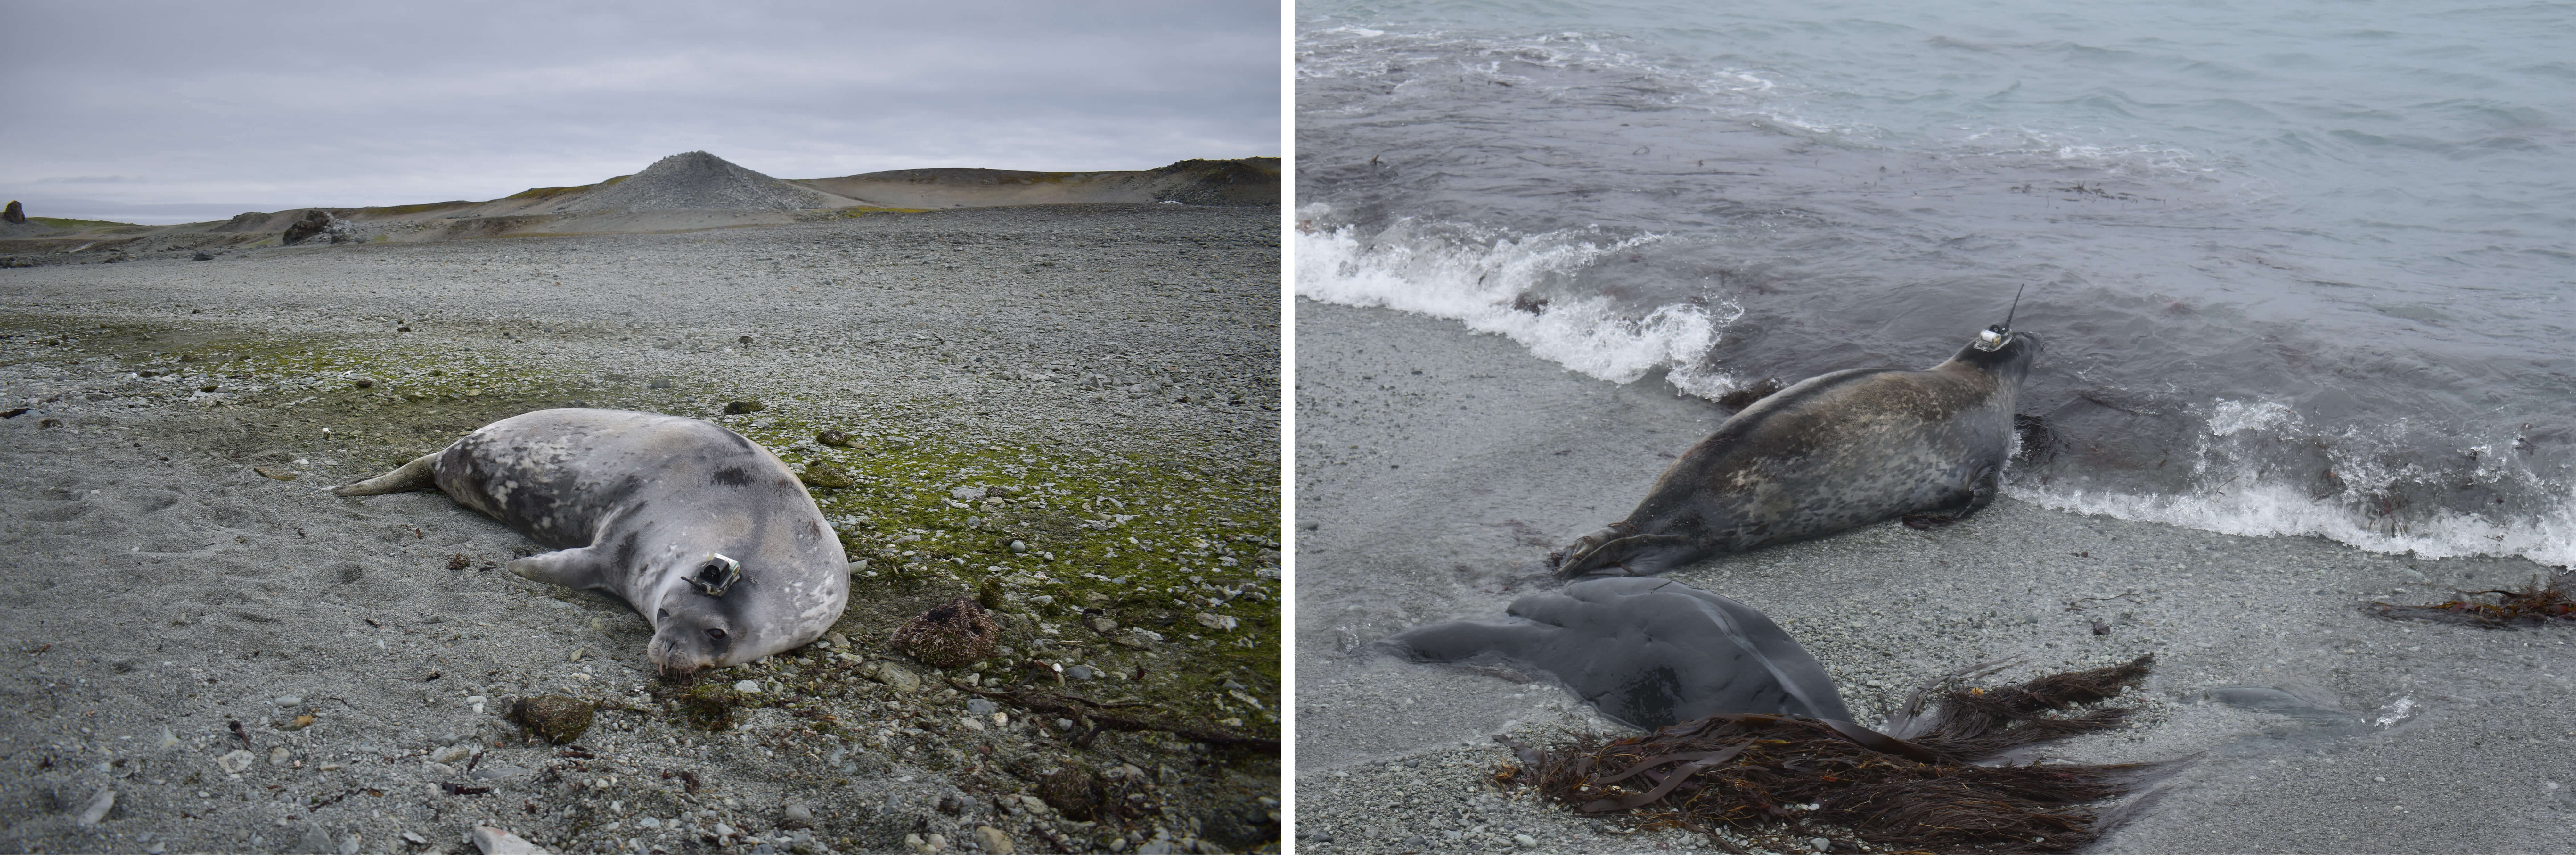 (Left) Example of a Weddell seal with a CTD tag attached to its head. (Right) Weddell seal returning to the ocean after its release. Photo credit: Luis Huckstadt